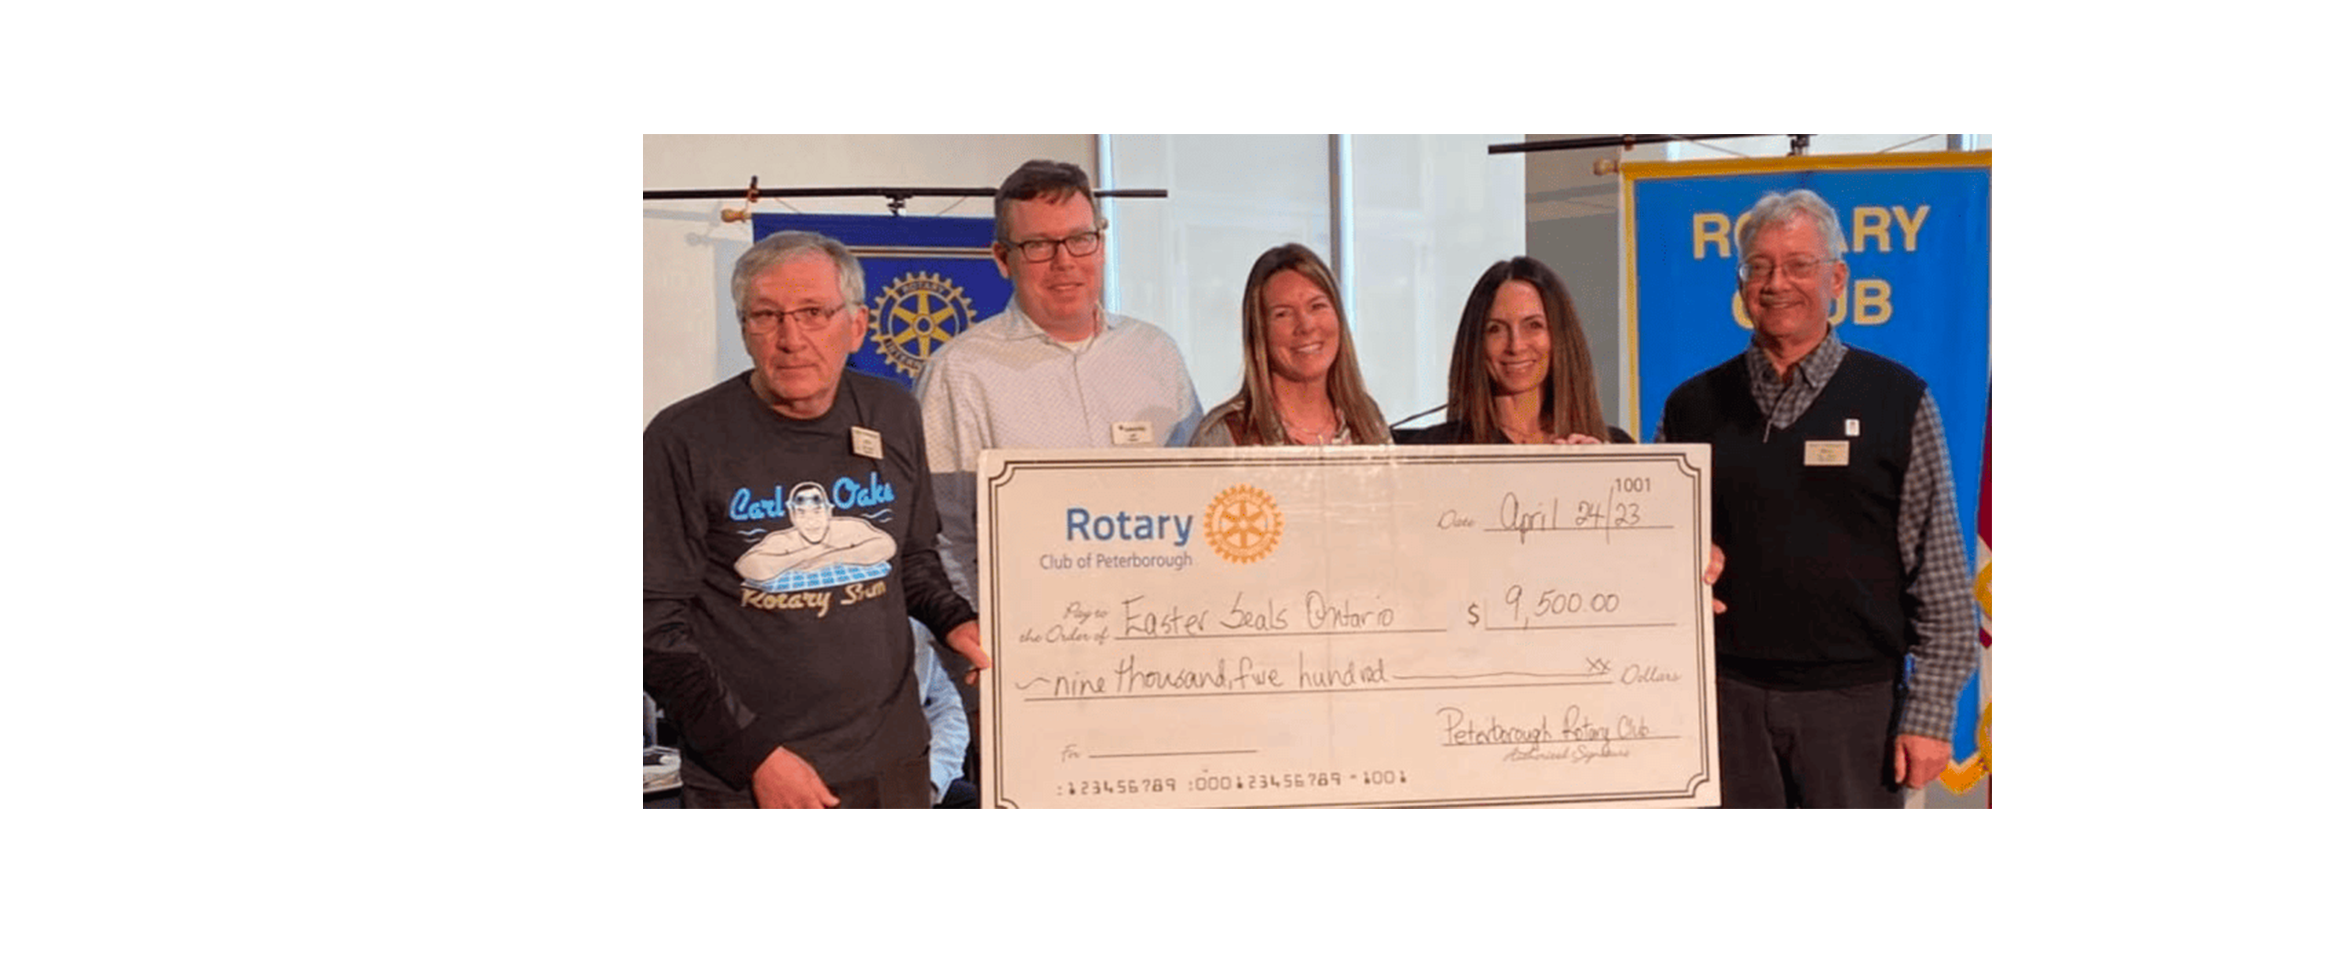 Swimming for a cause: Century 21 United Realty helps raise $40,000 for charit